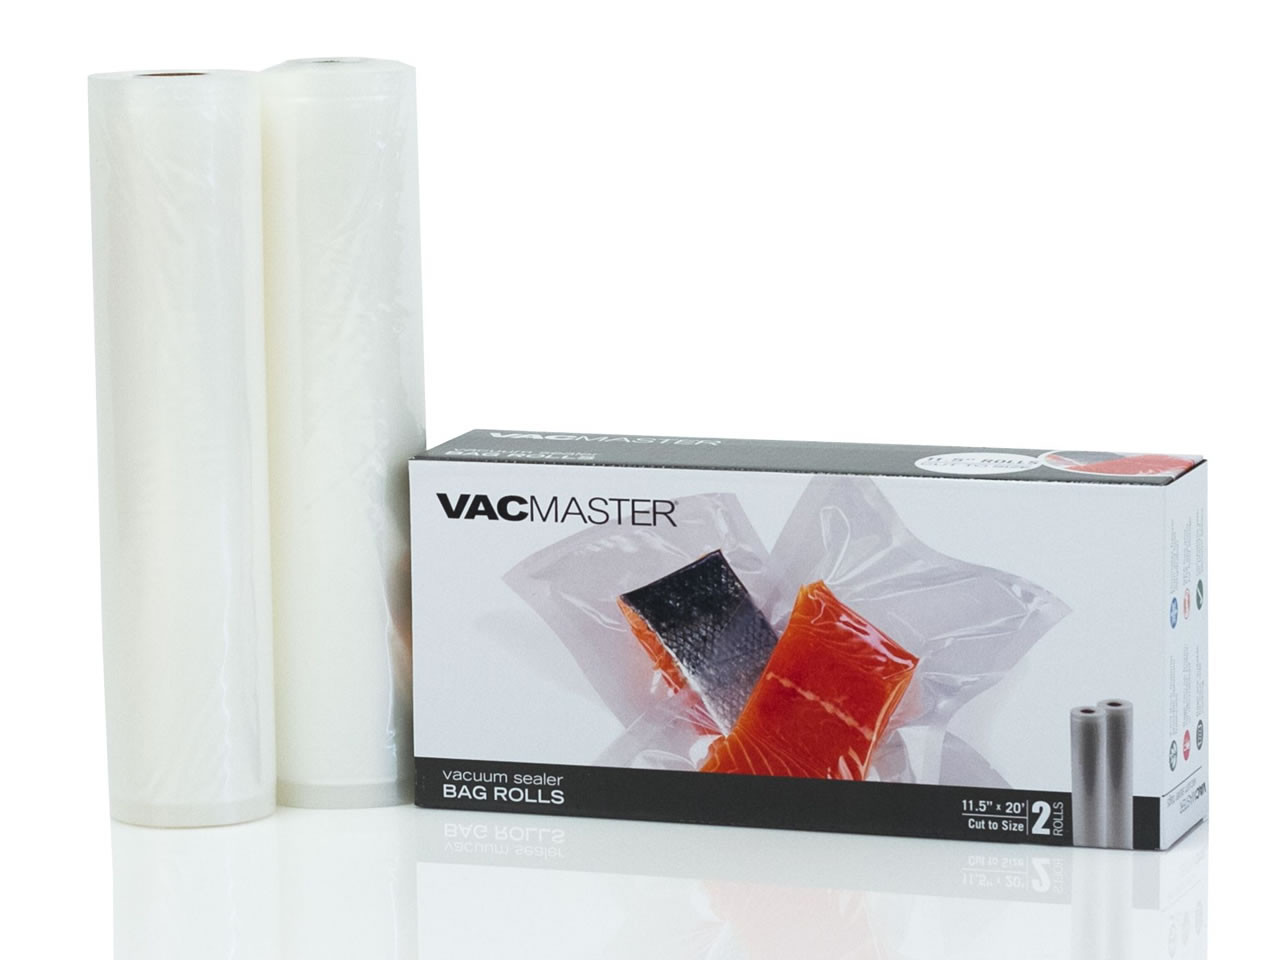 VacMaster Food Saver Style Bags 11.5 x 20' - 2-Rolls - Butcher